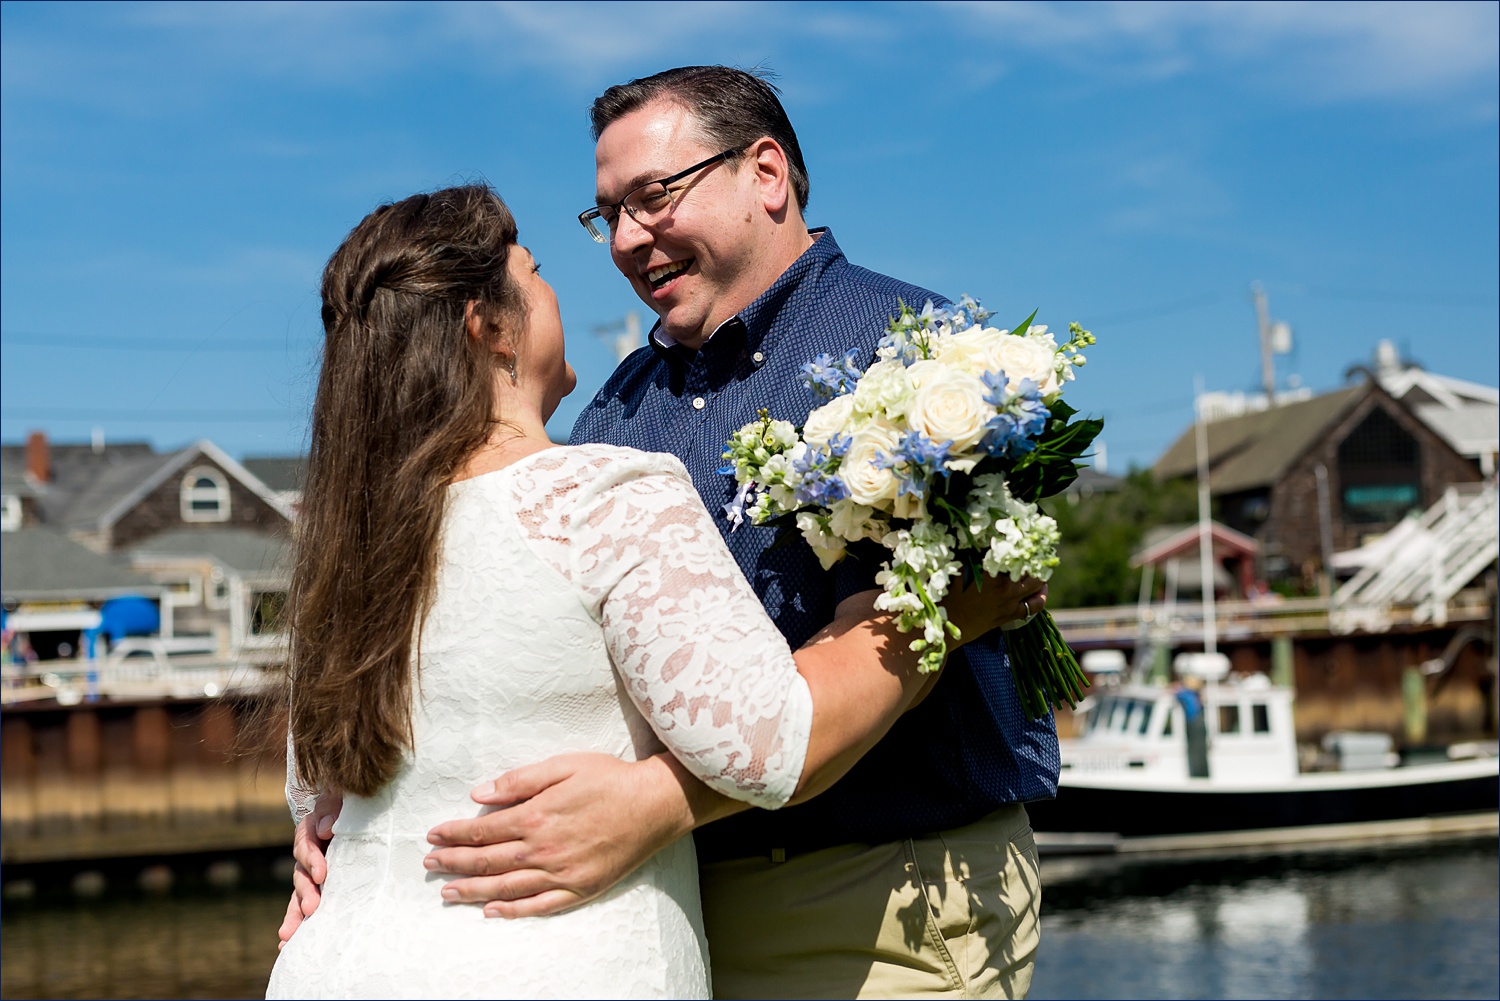 The happy couple on their wedding day in Perkin's Cove Maine